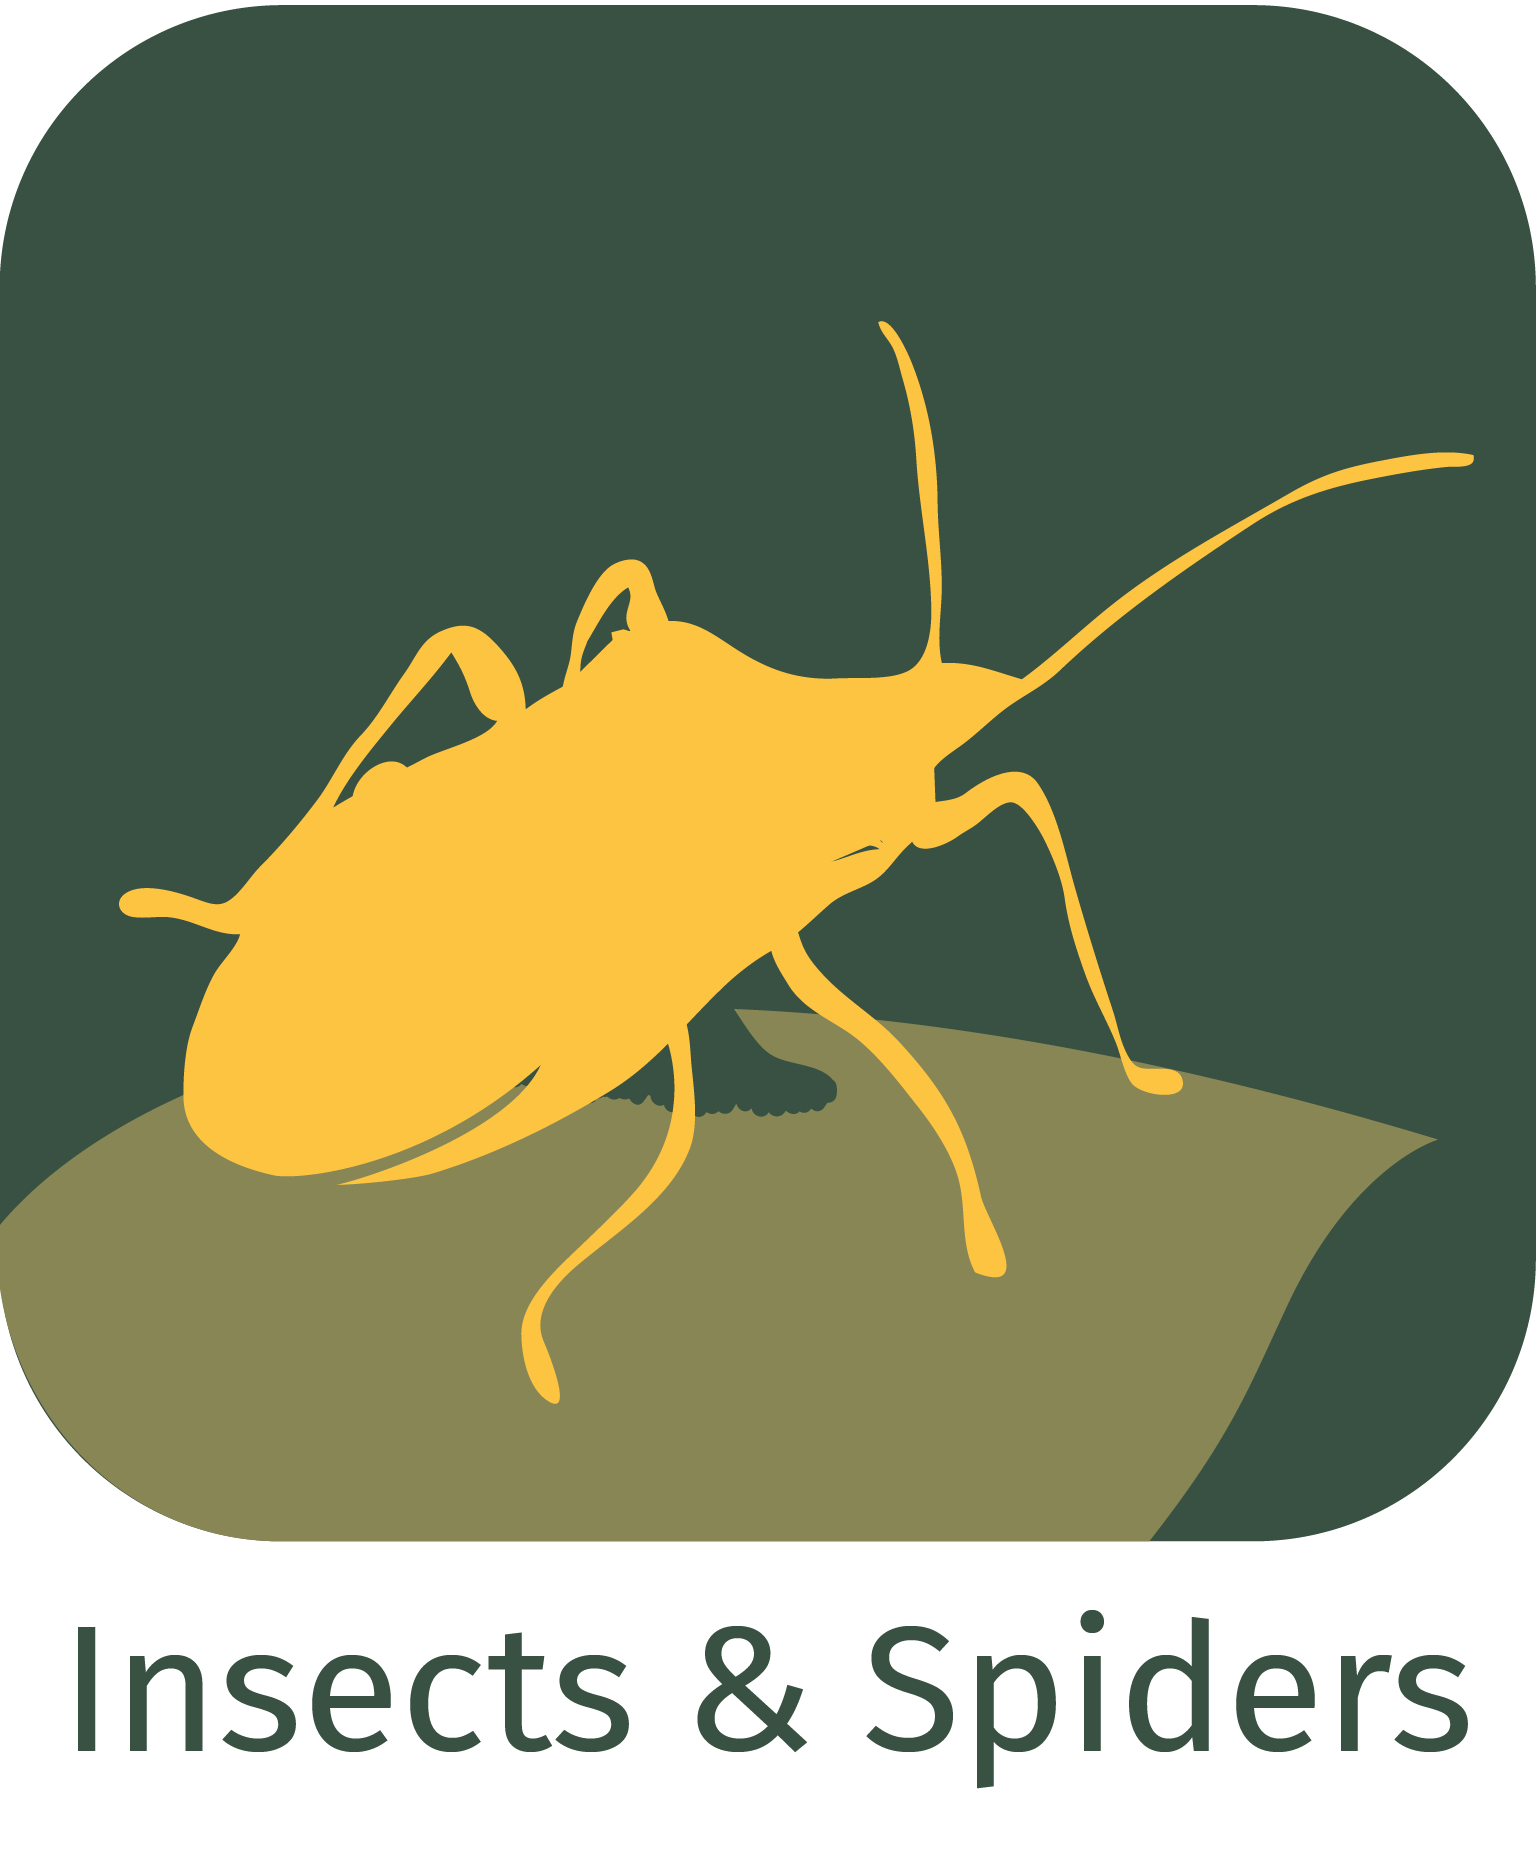 insects and spiders app icon